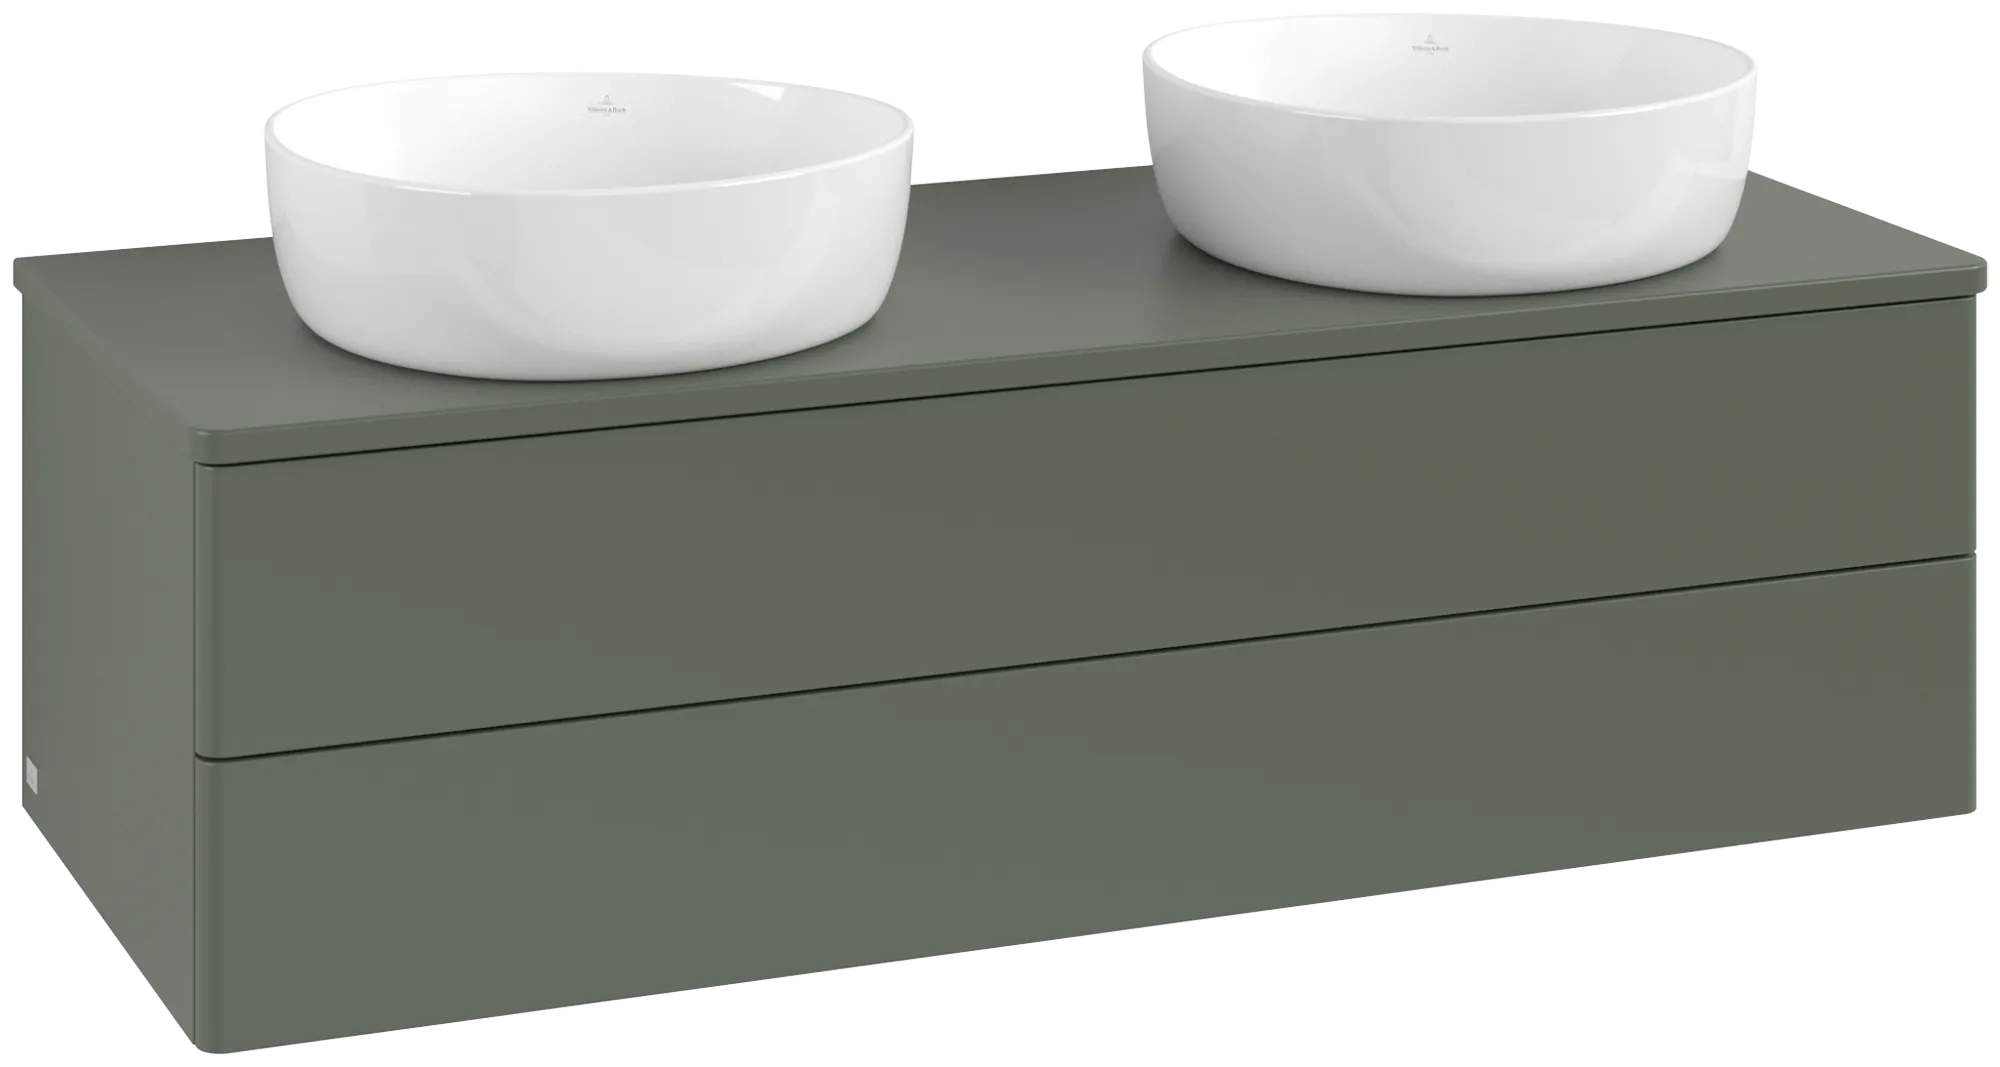 Obrázek VILLEROY BOCH Antao Vanity unit, with lighting, 2 pull-out compartments, 1200 x 360 x 500 mm, Front without structure, Leaf Green Matt Lacquer / Leaf Green Matt Lacquer #L24010HL